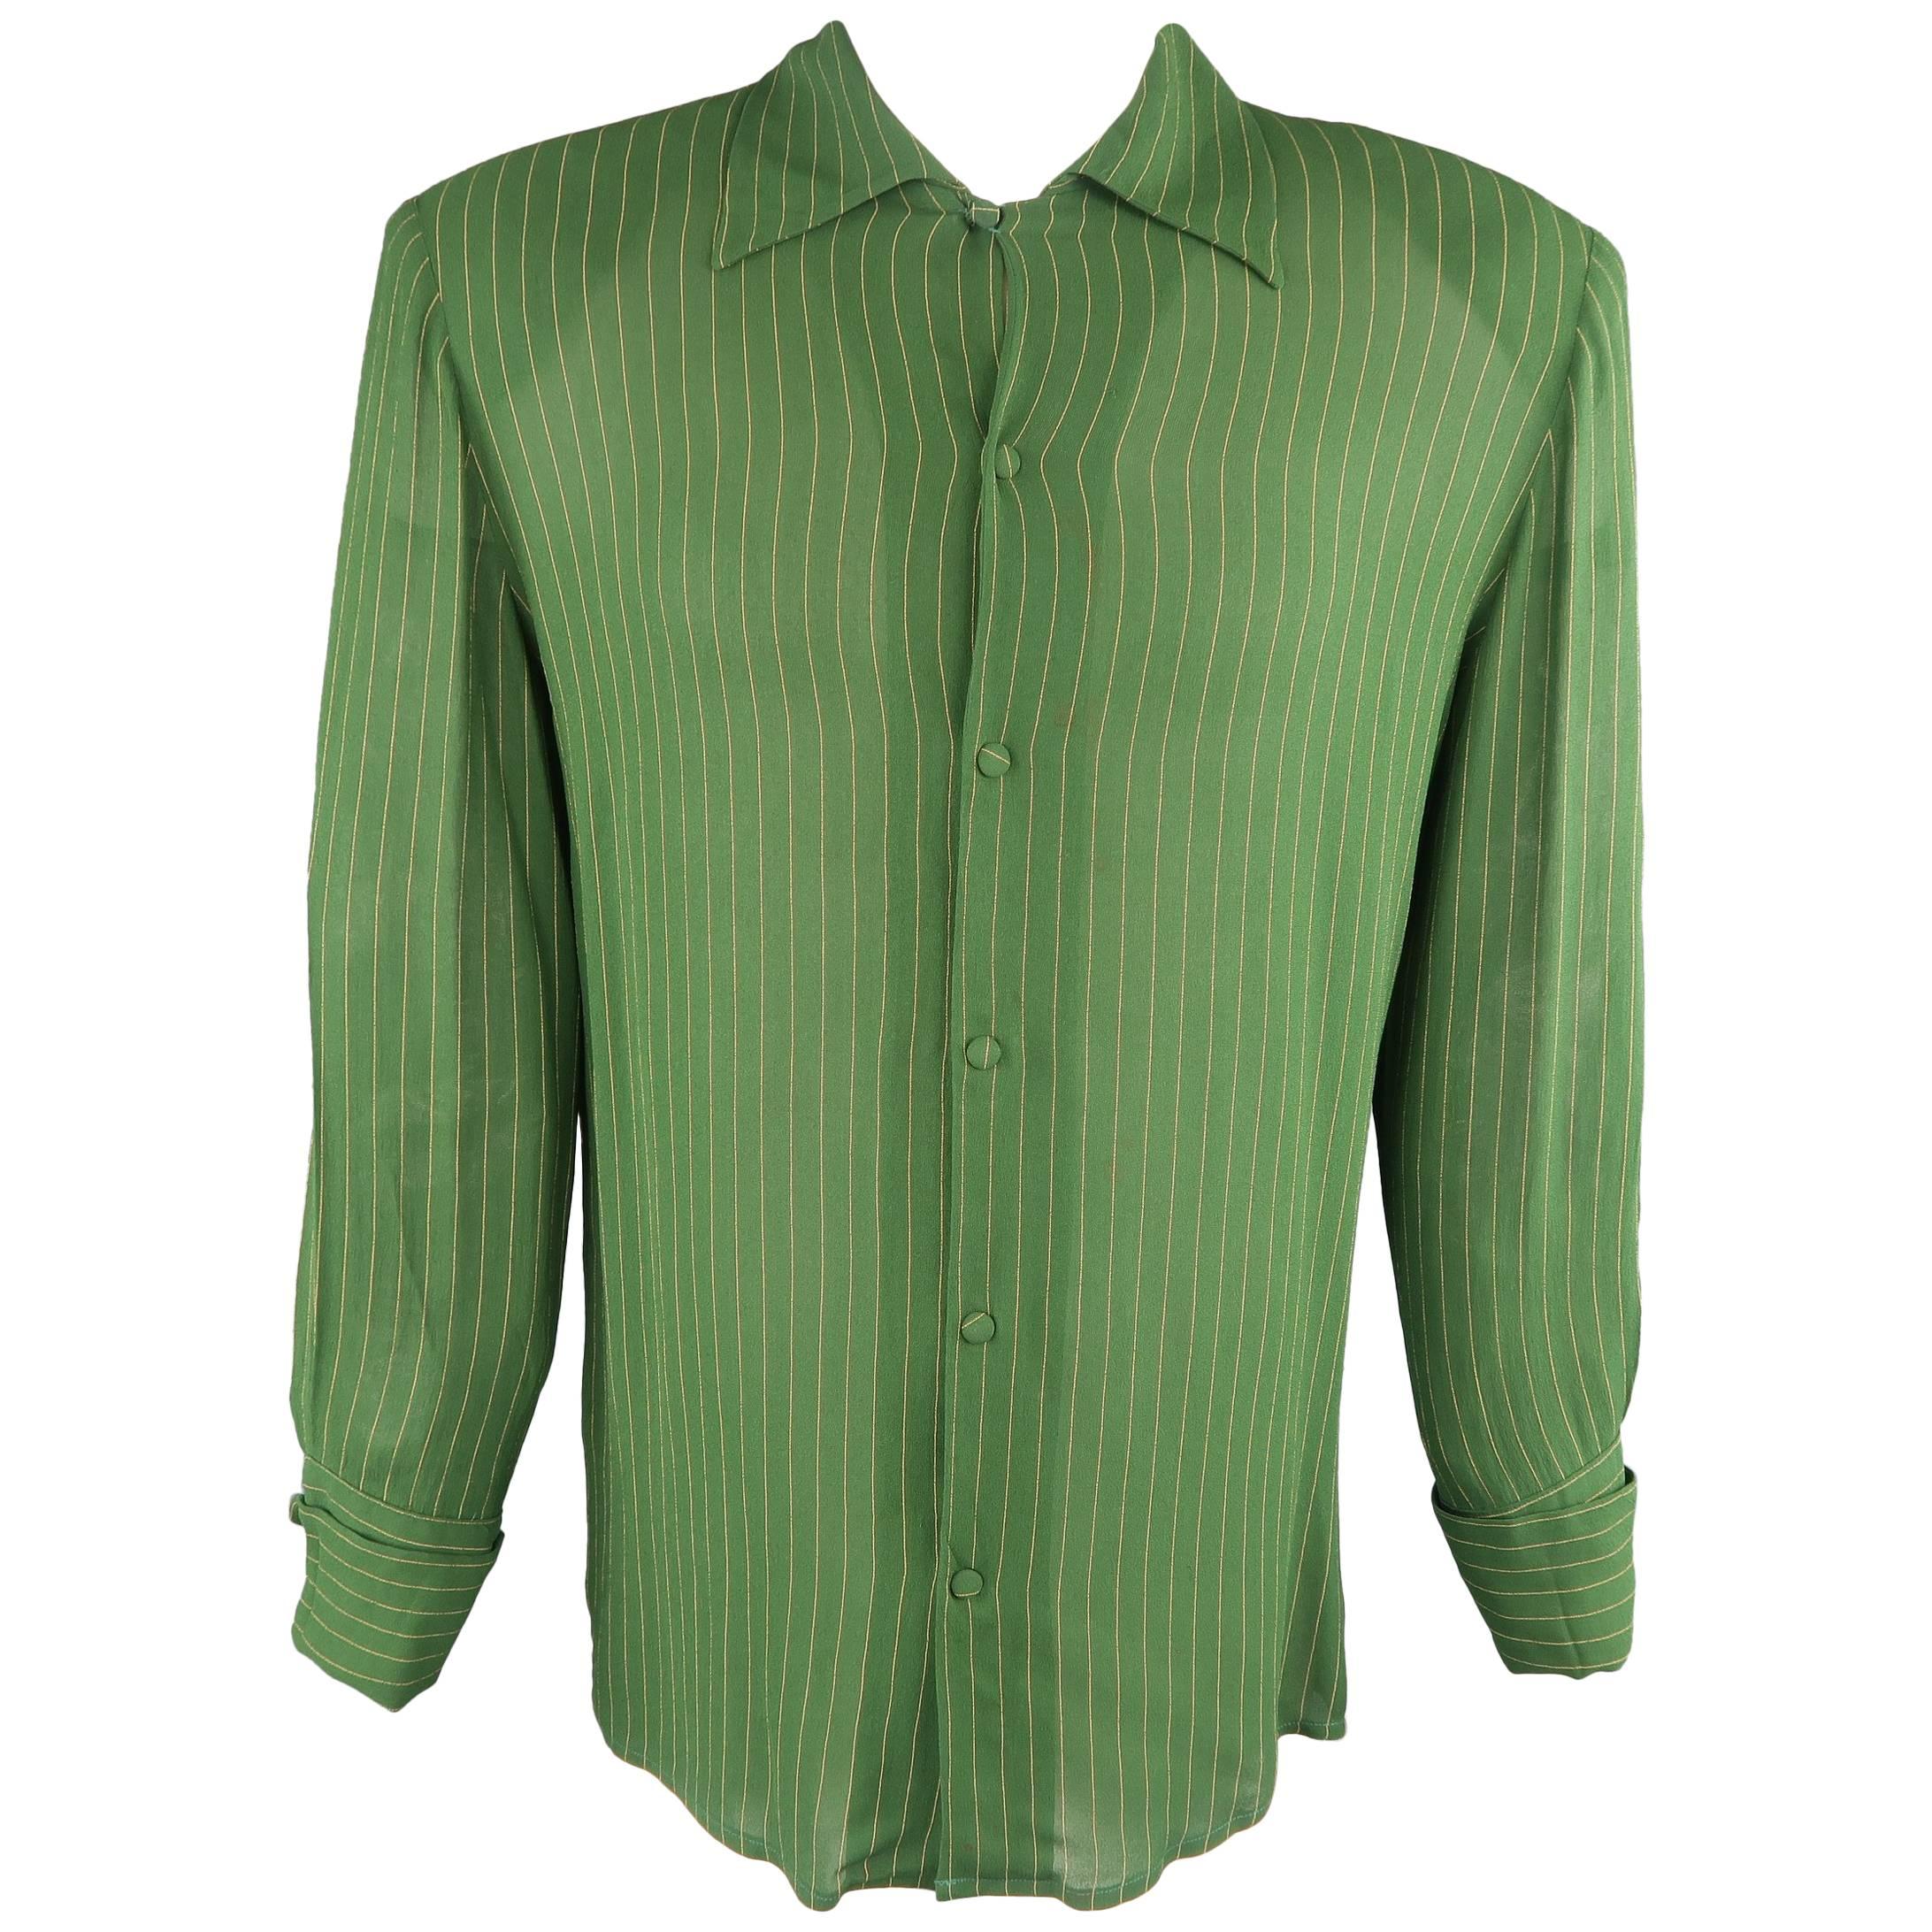 Jean Paul Gaultier Men's Green and Yellow Pinstripe Crepe French Cuff Shirt